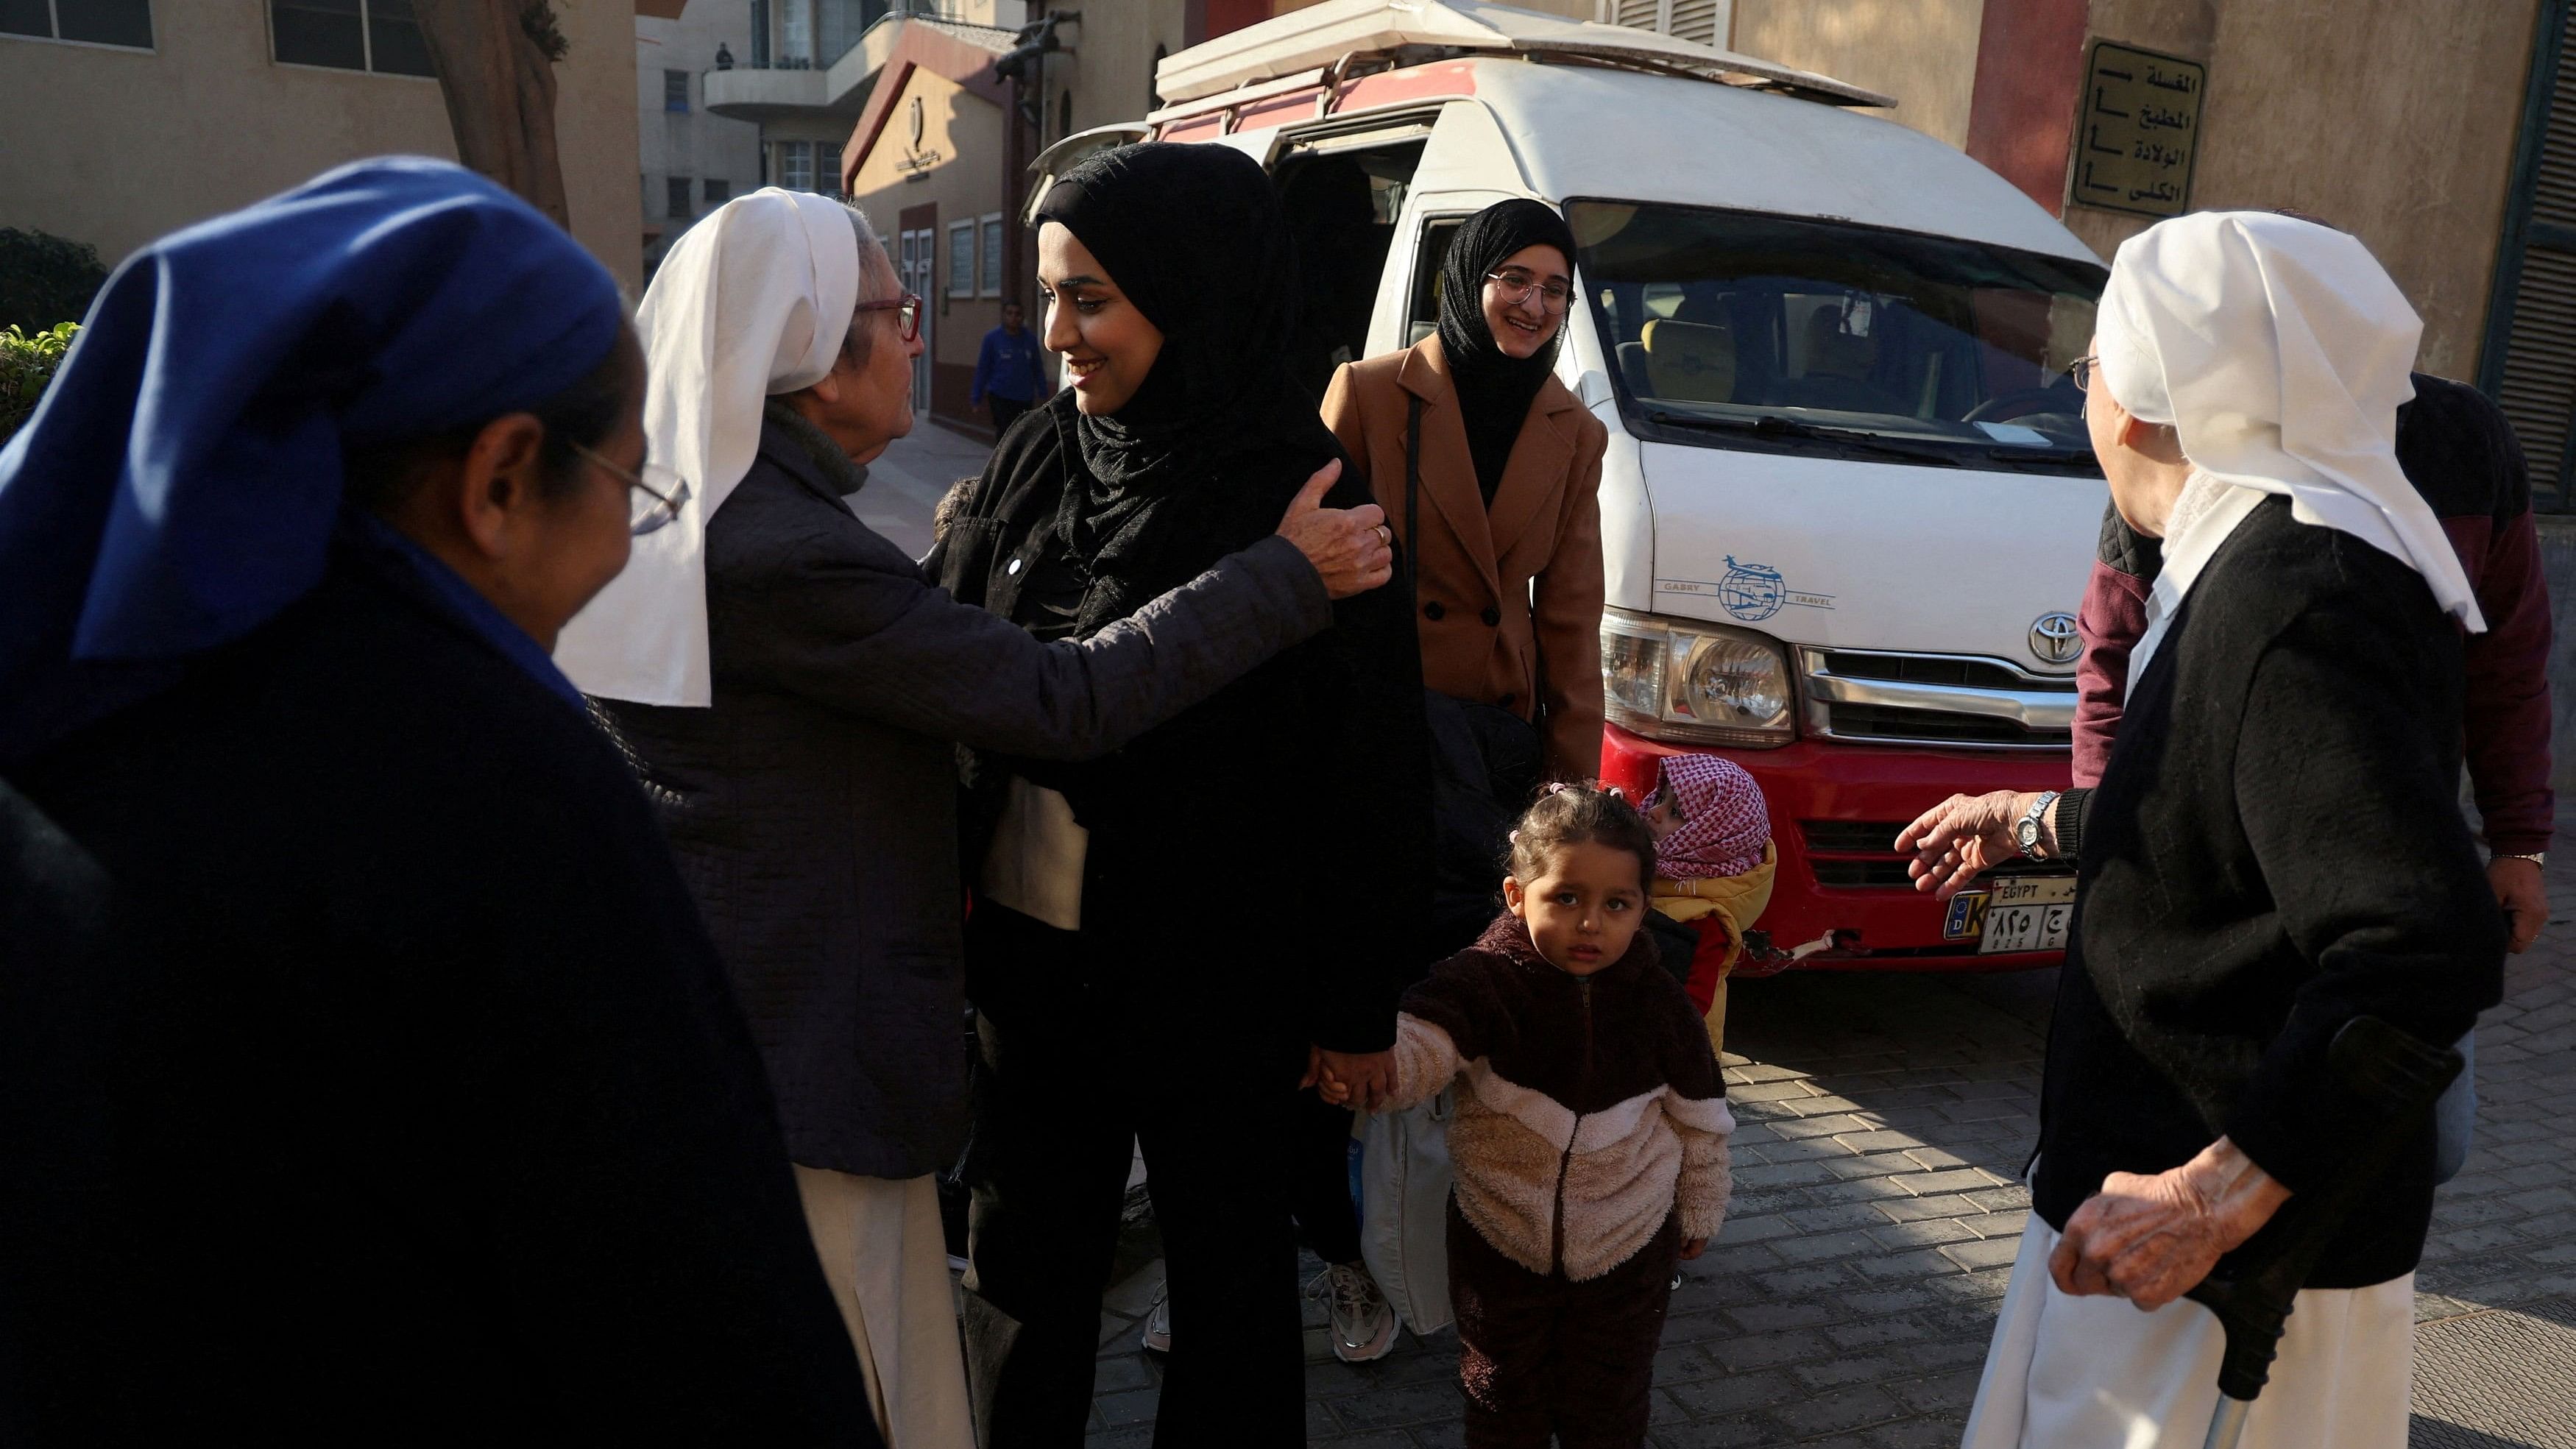 <div class="paragraphs"><p>Sister Pina, an Italian head nun at the hospital Umberto I, hugs members of Palestinian families who were evacuated from Gaza amid the ongoing conflict between Israel and the Palestinian Islamist group Hamas.</p></div>